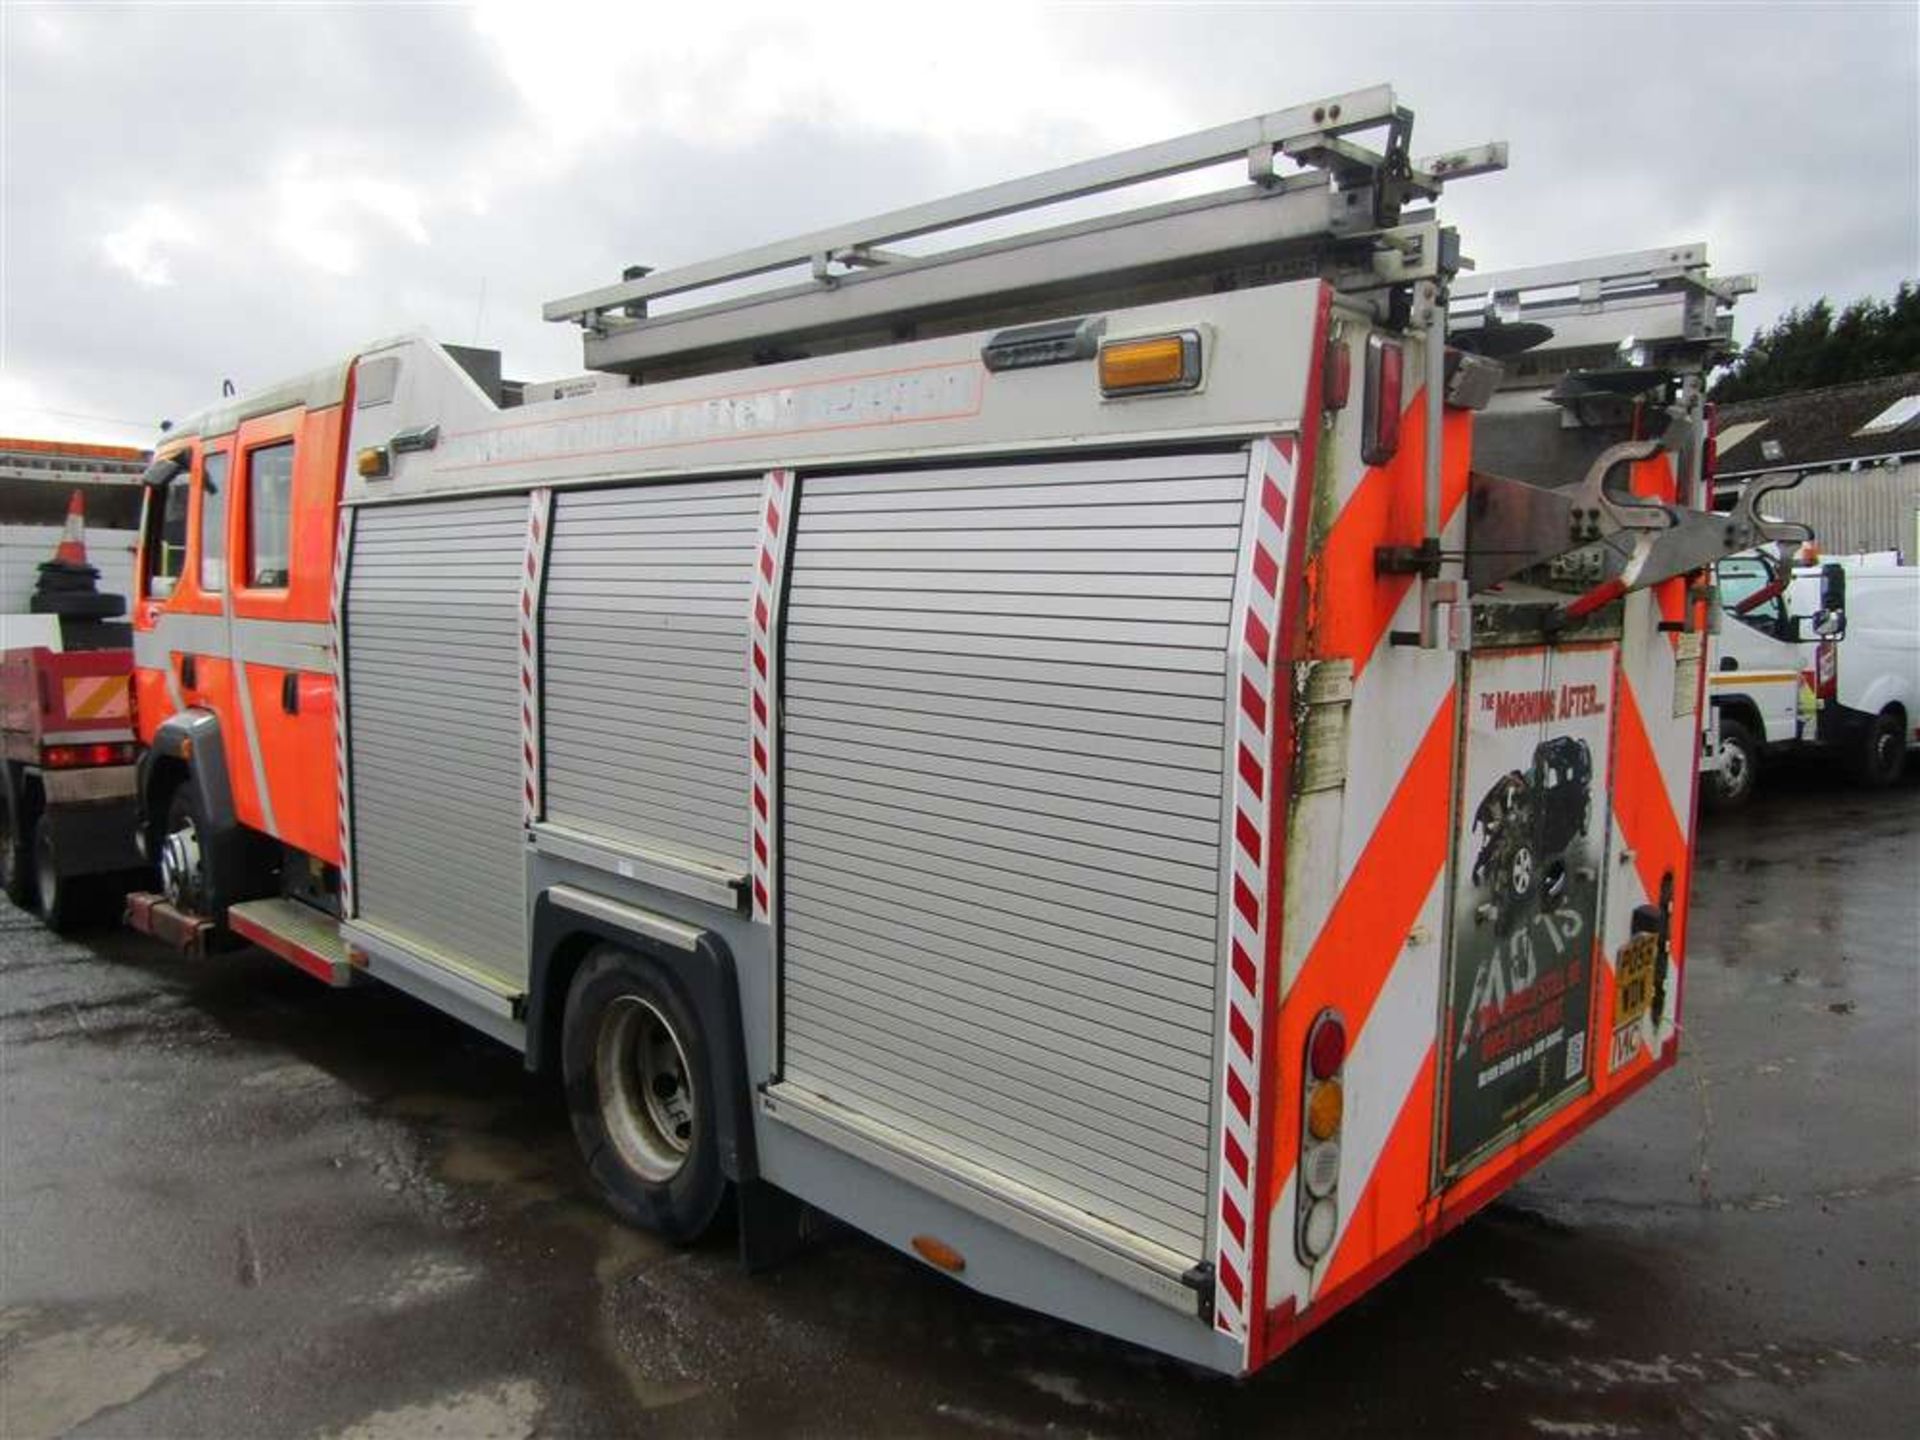 2006 55 reg DAF FA CF65.250 Fire Engine (Non Runner) (Direct Lancs Fire & Rescue) - Image 3 of 6